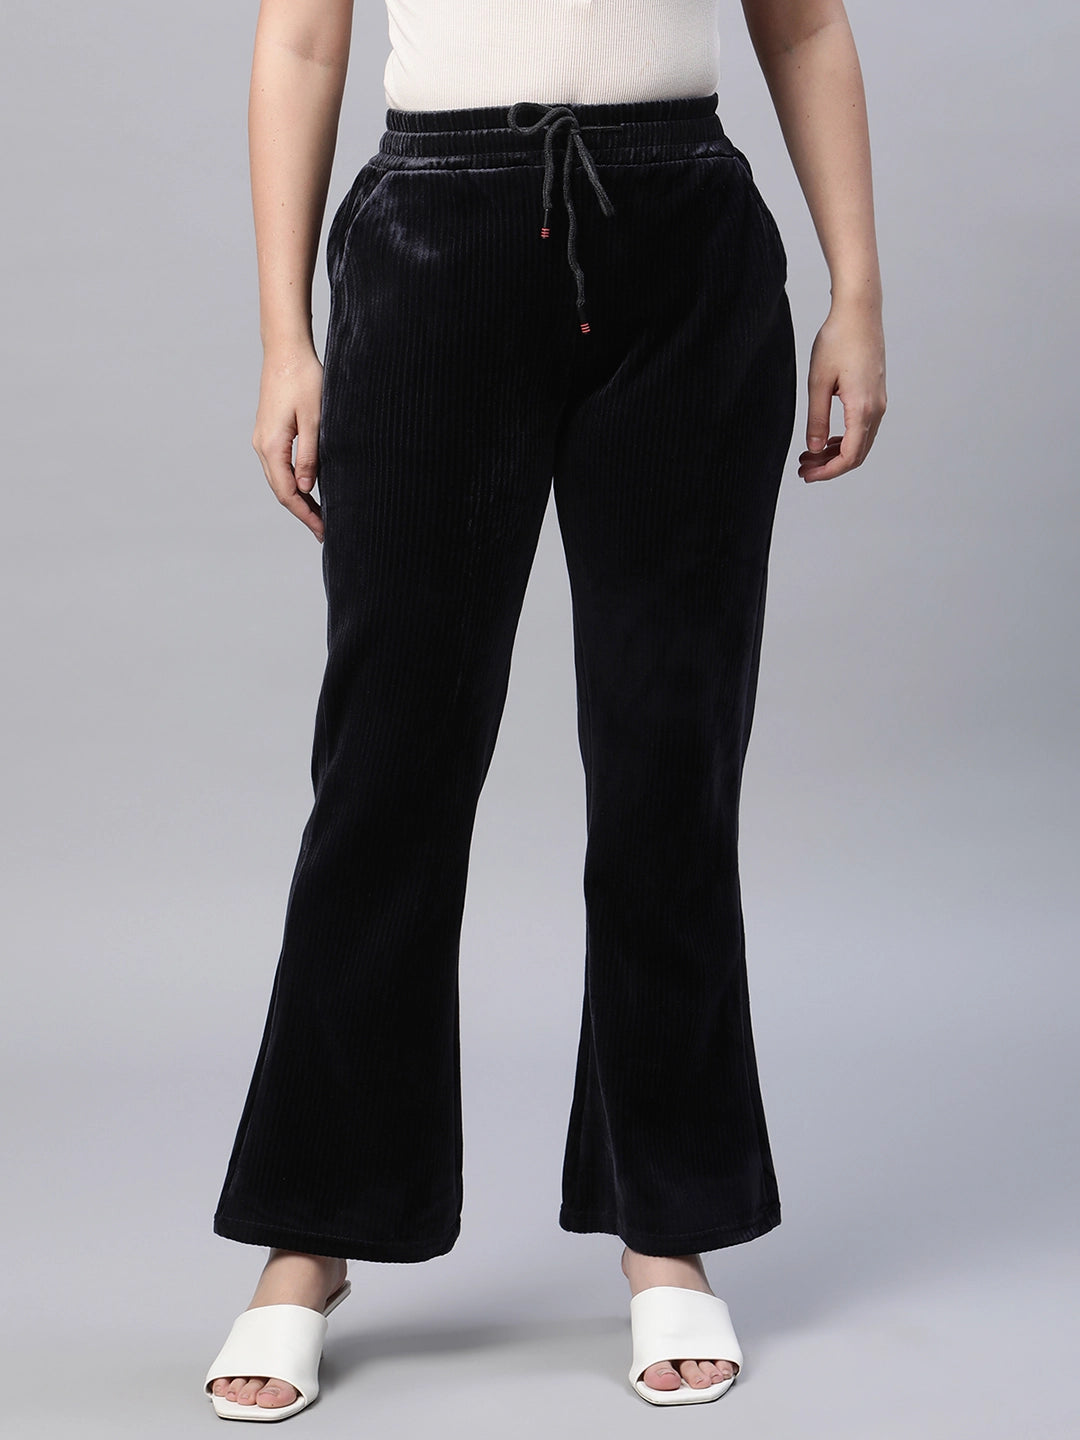 Buy Cotton Joggers & Lower Pants for Ladies- Global Republic - Global ...